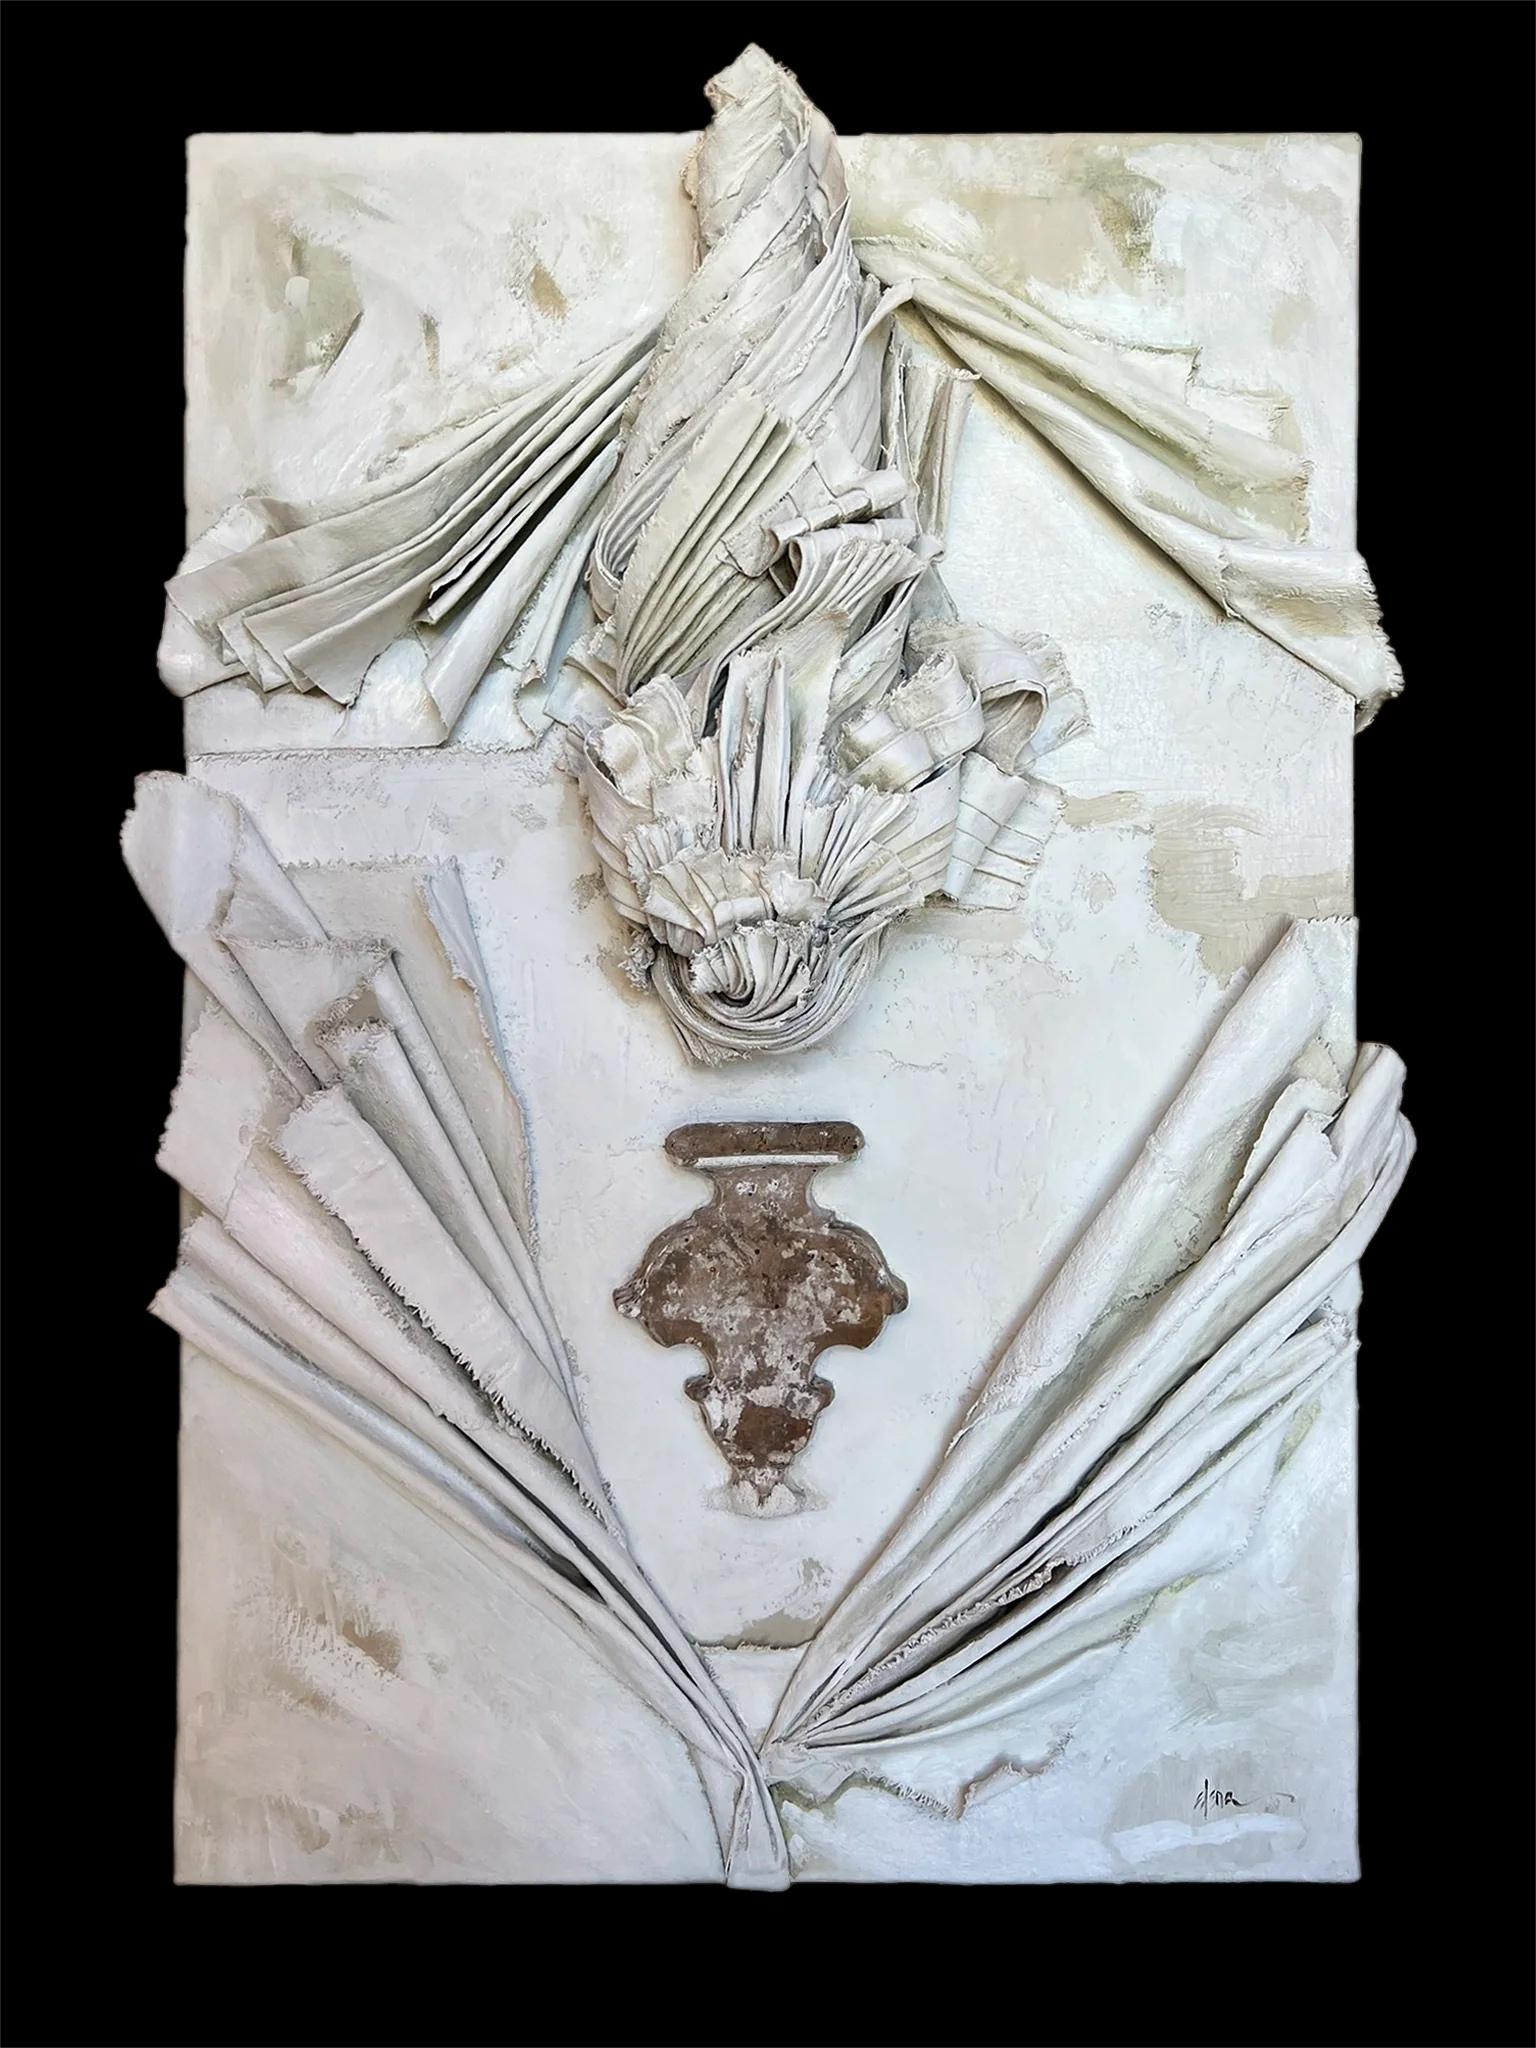 Sculptural canvas relief with a 17th century Italian Florence fragment by Elena Rousseau.

The sculpted canvas is molded together with the canvas Material, oils, and ash on board. The original 17th century Italian Florence fragment is molded into